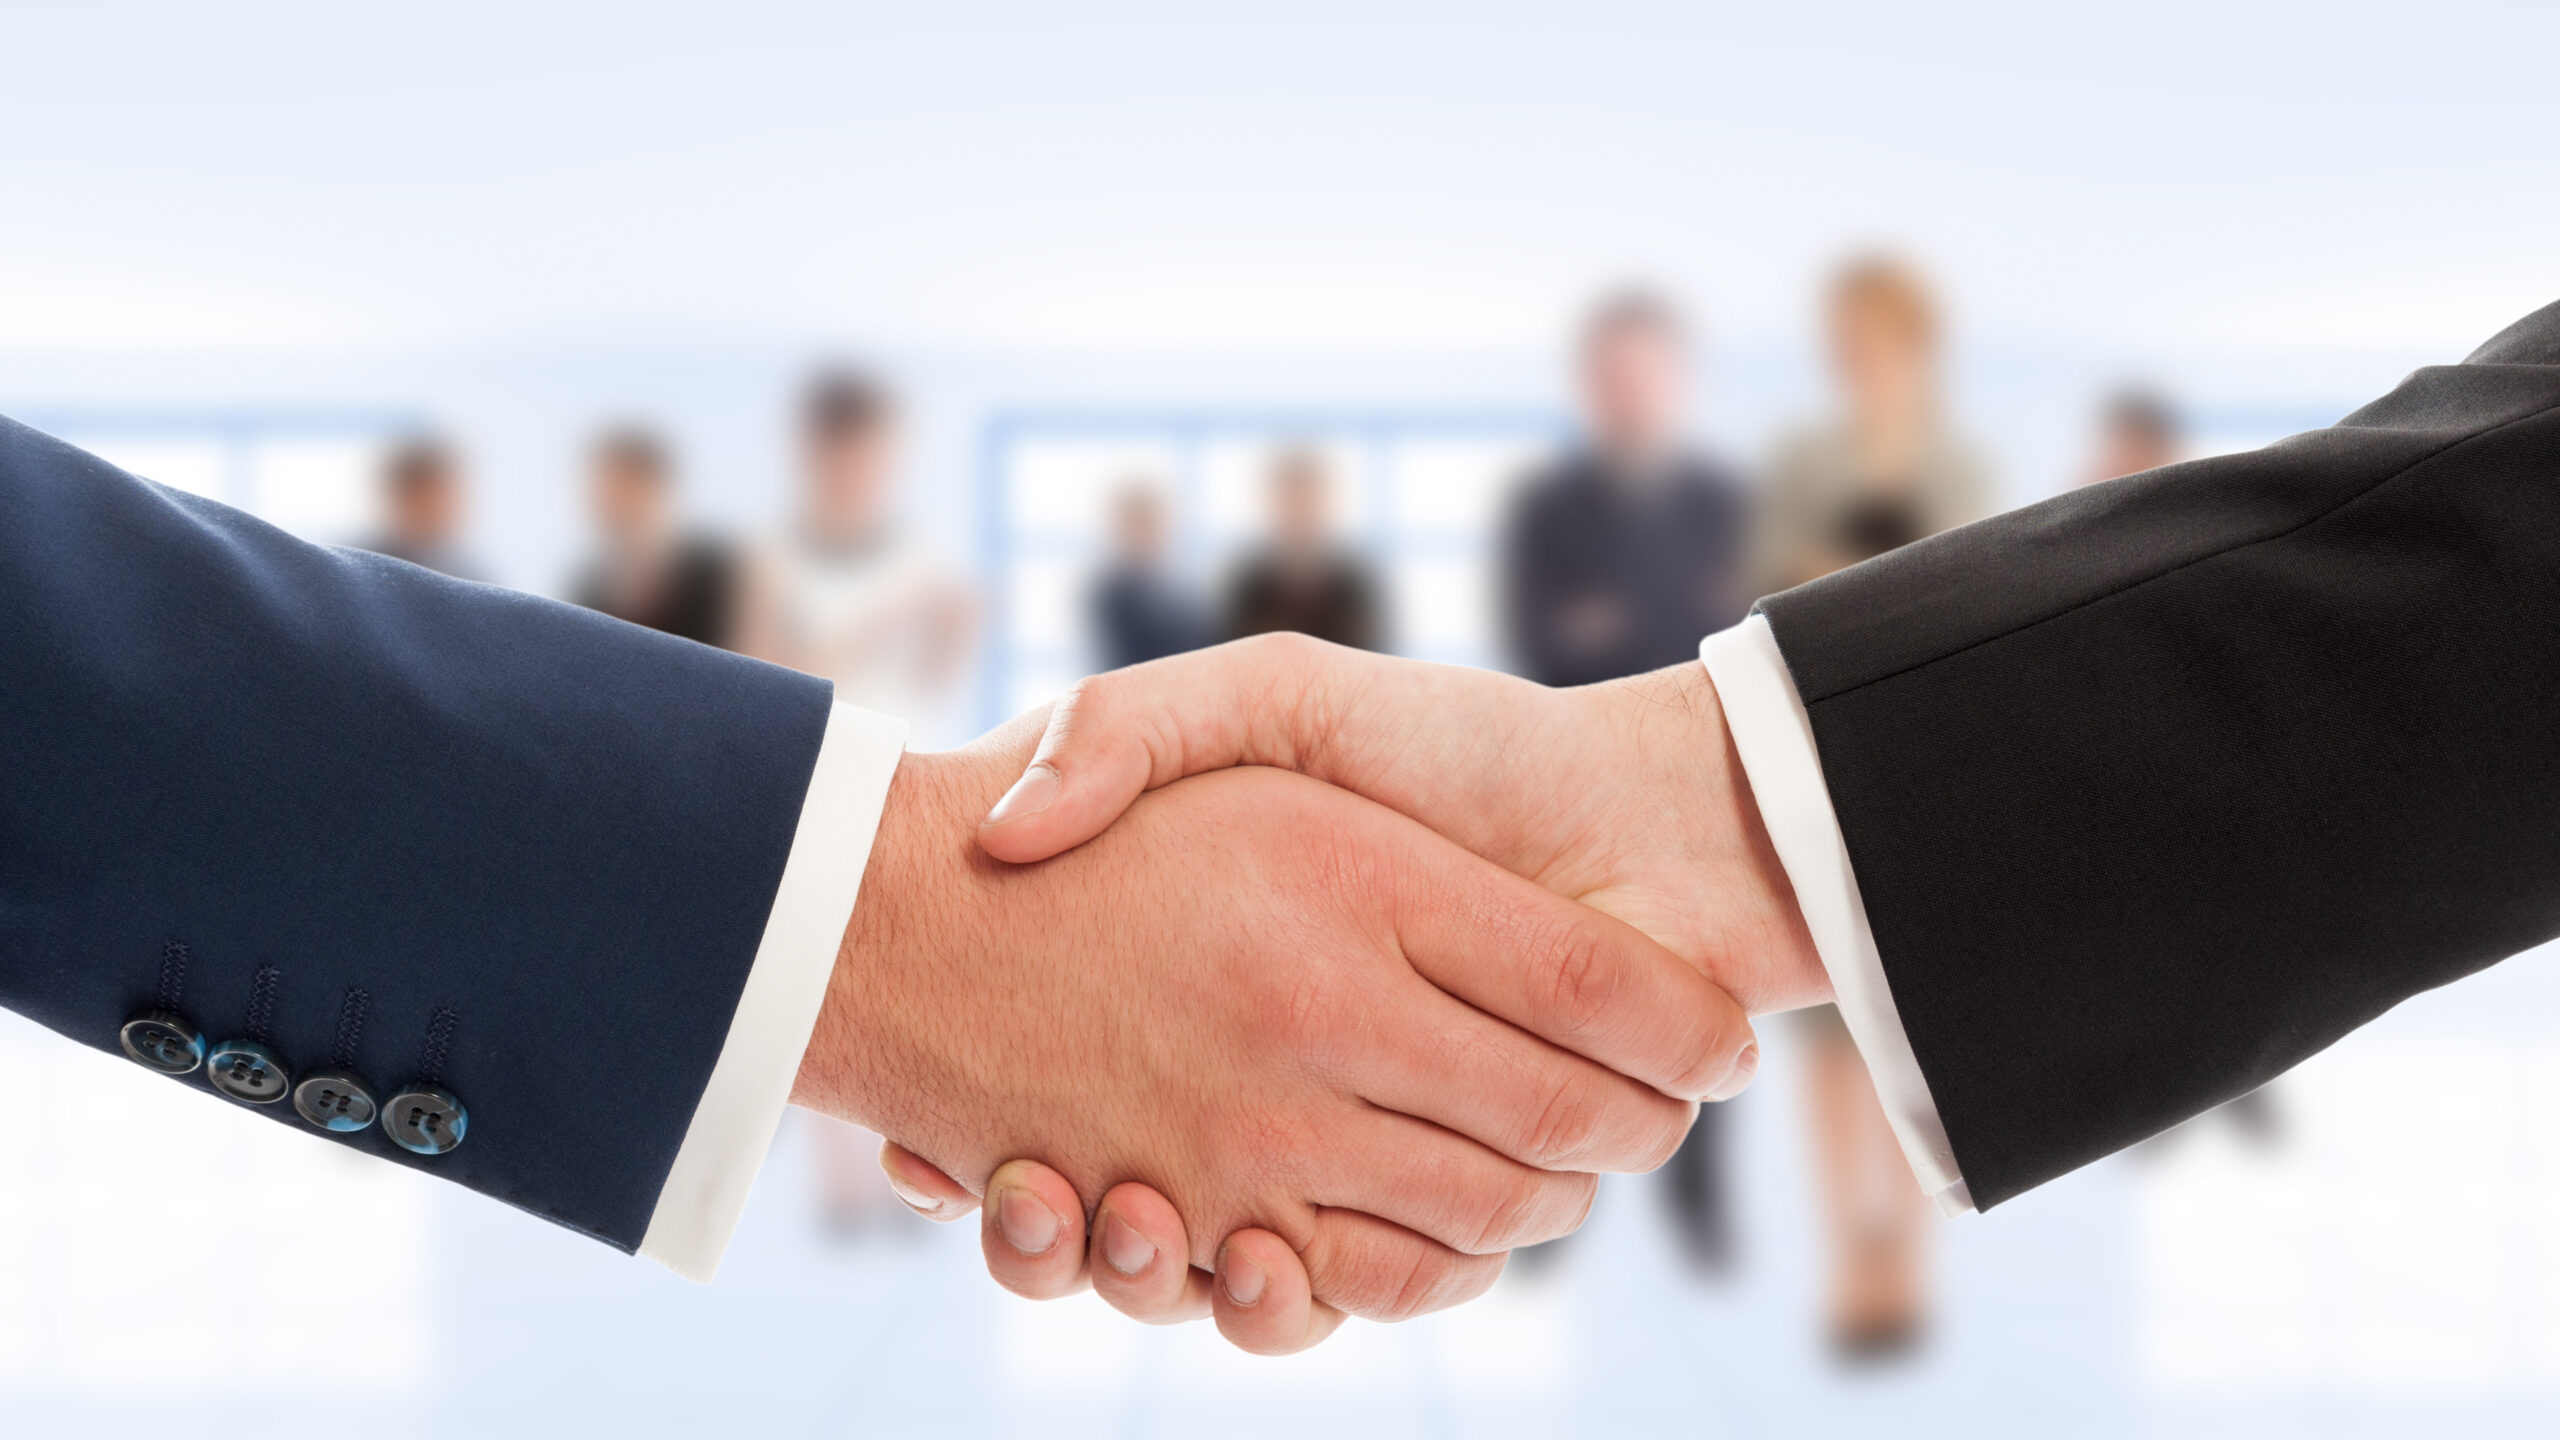 Businessmen shake hands with blurred business people in background